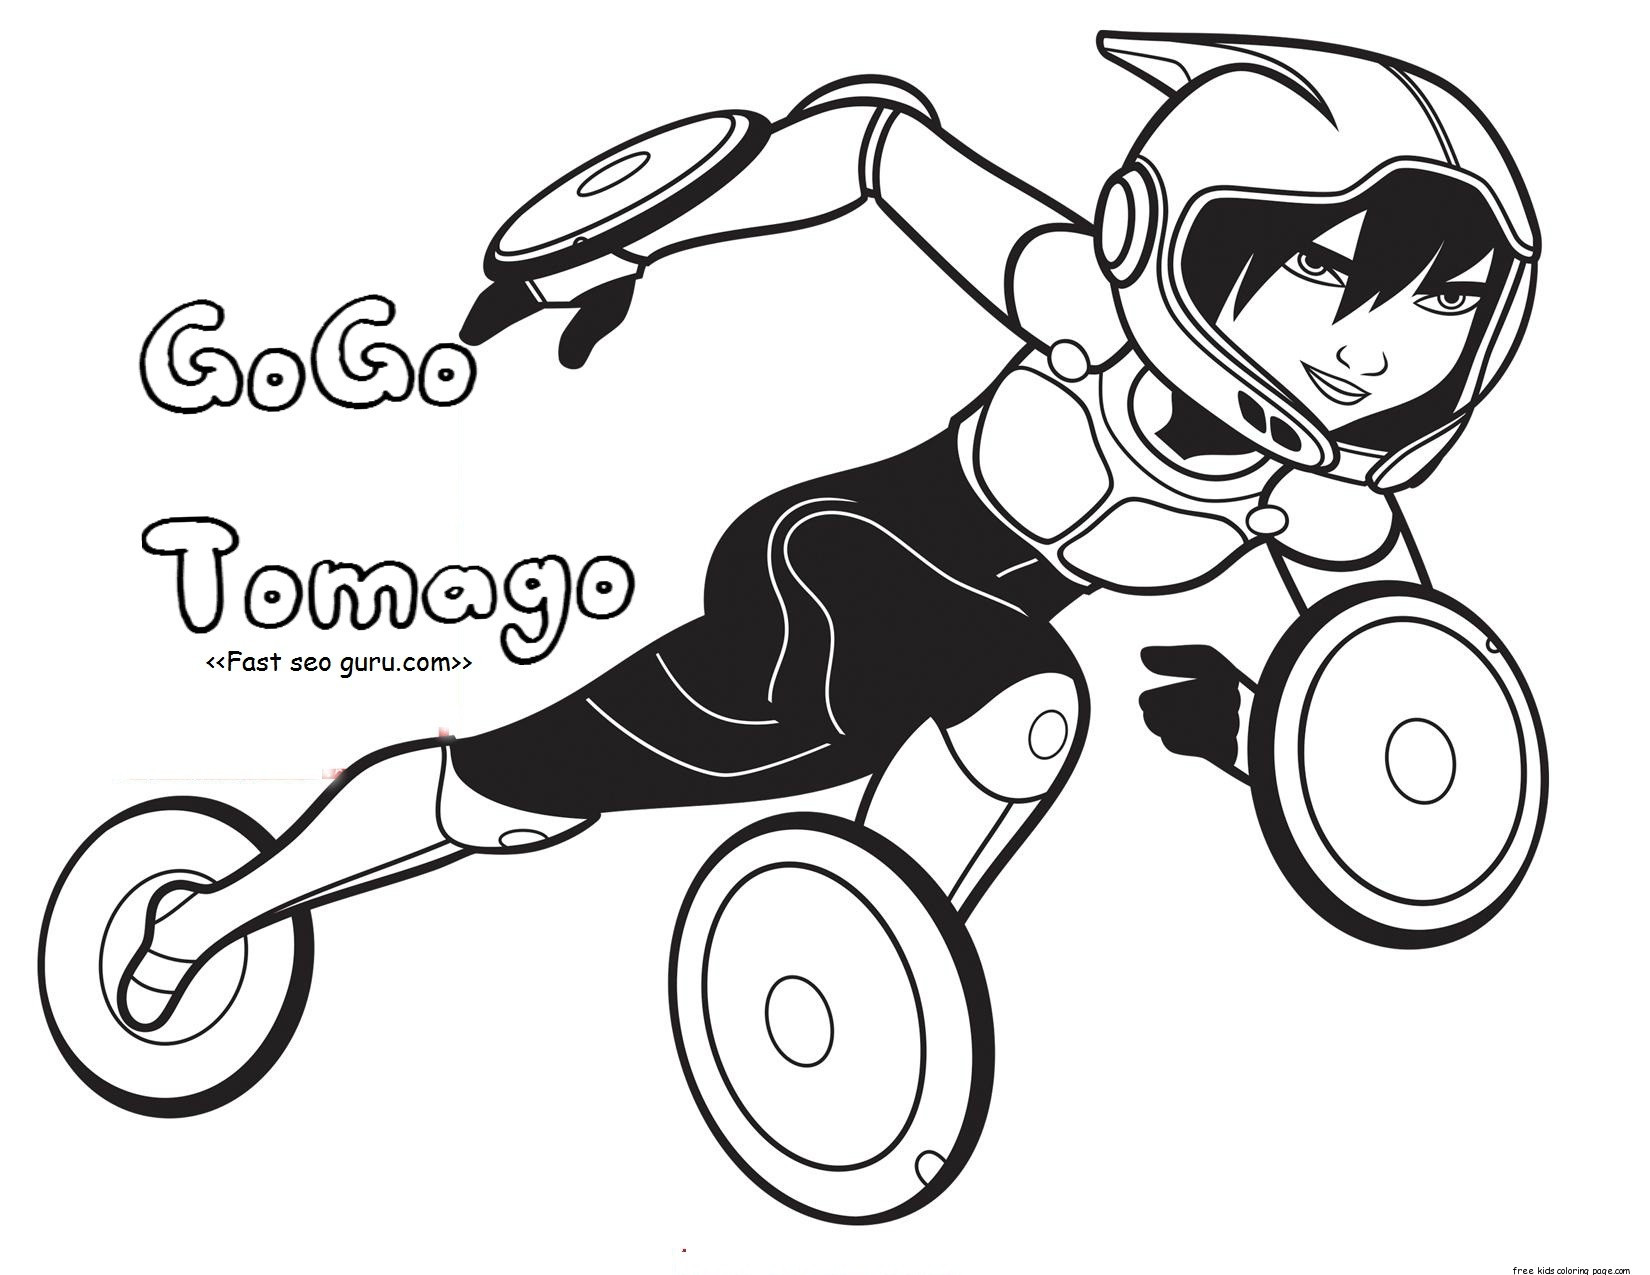 Coloring Pages For Big Kids
 Printable big hero 6 coloring pages gogo tomago for